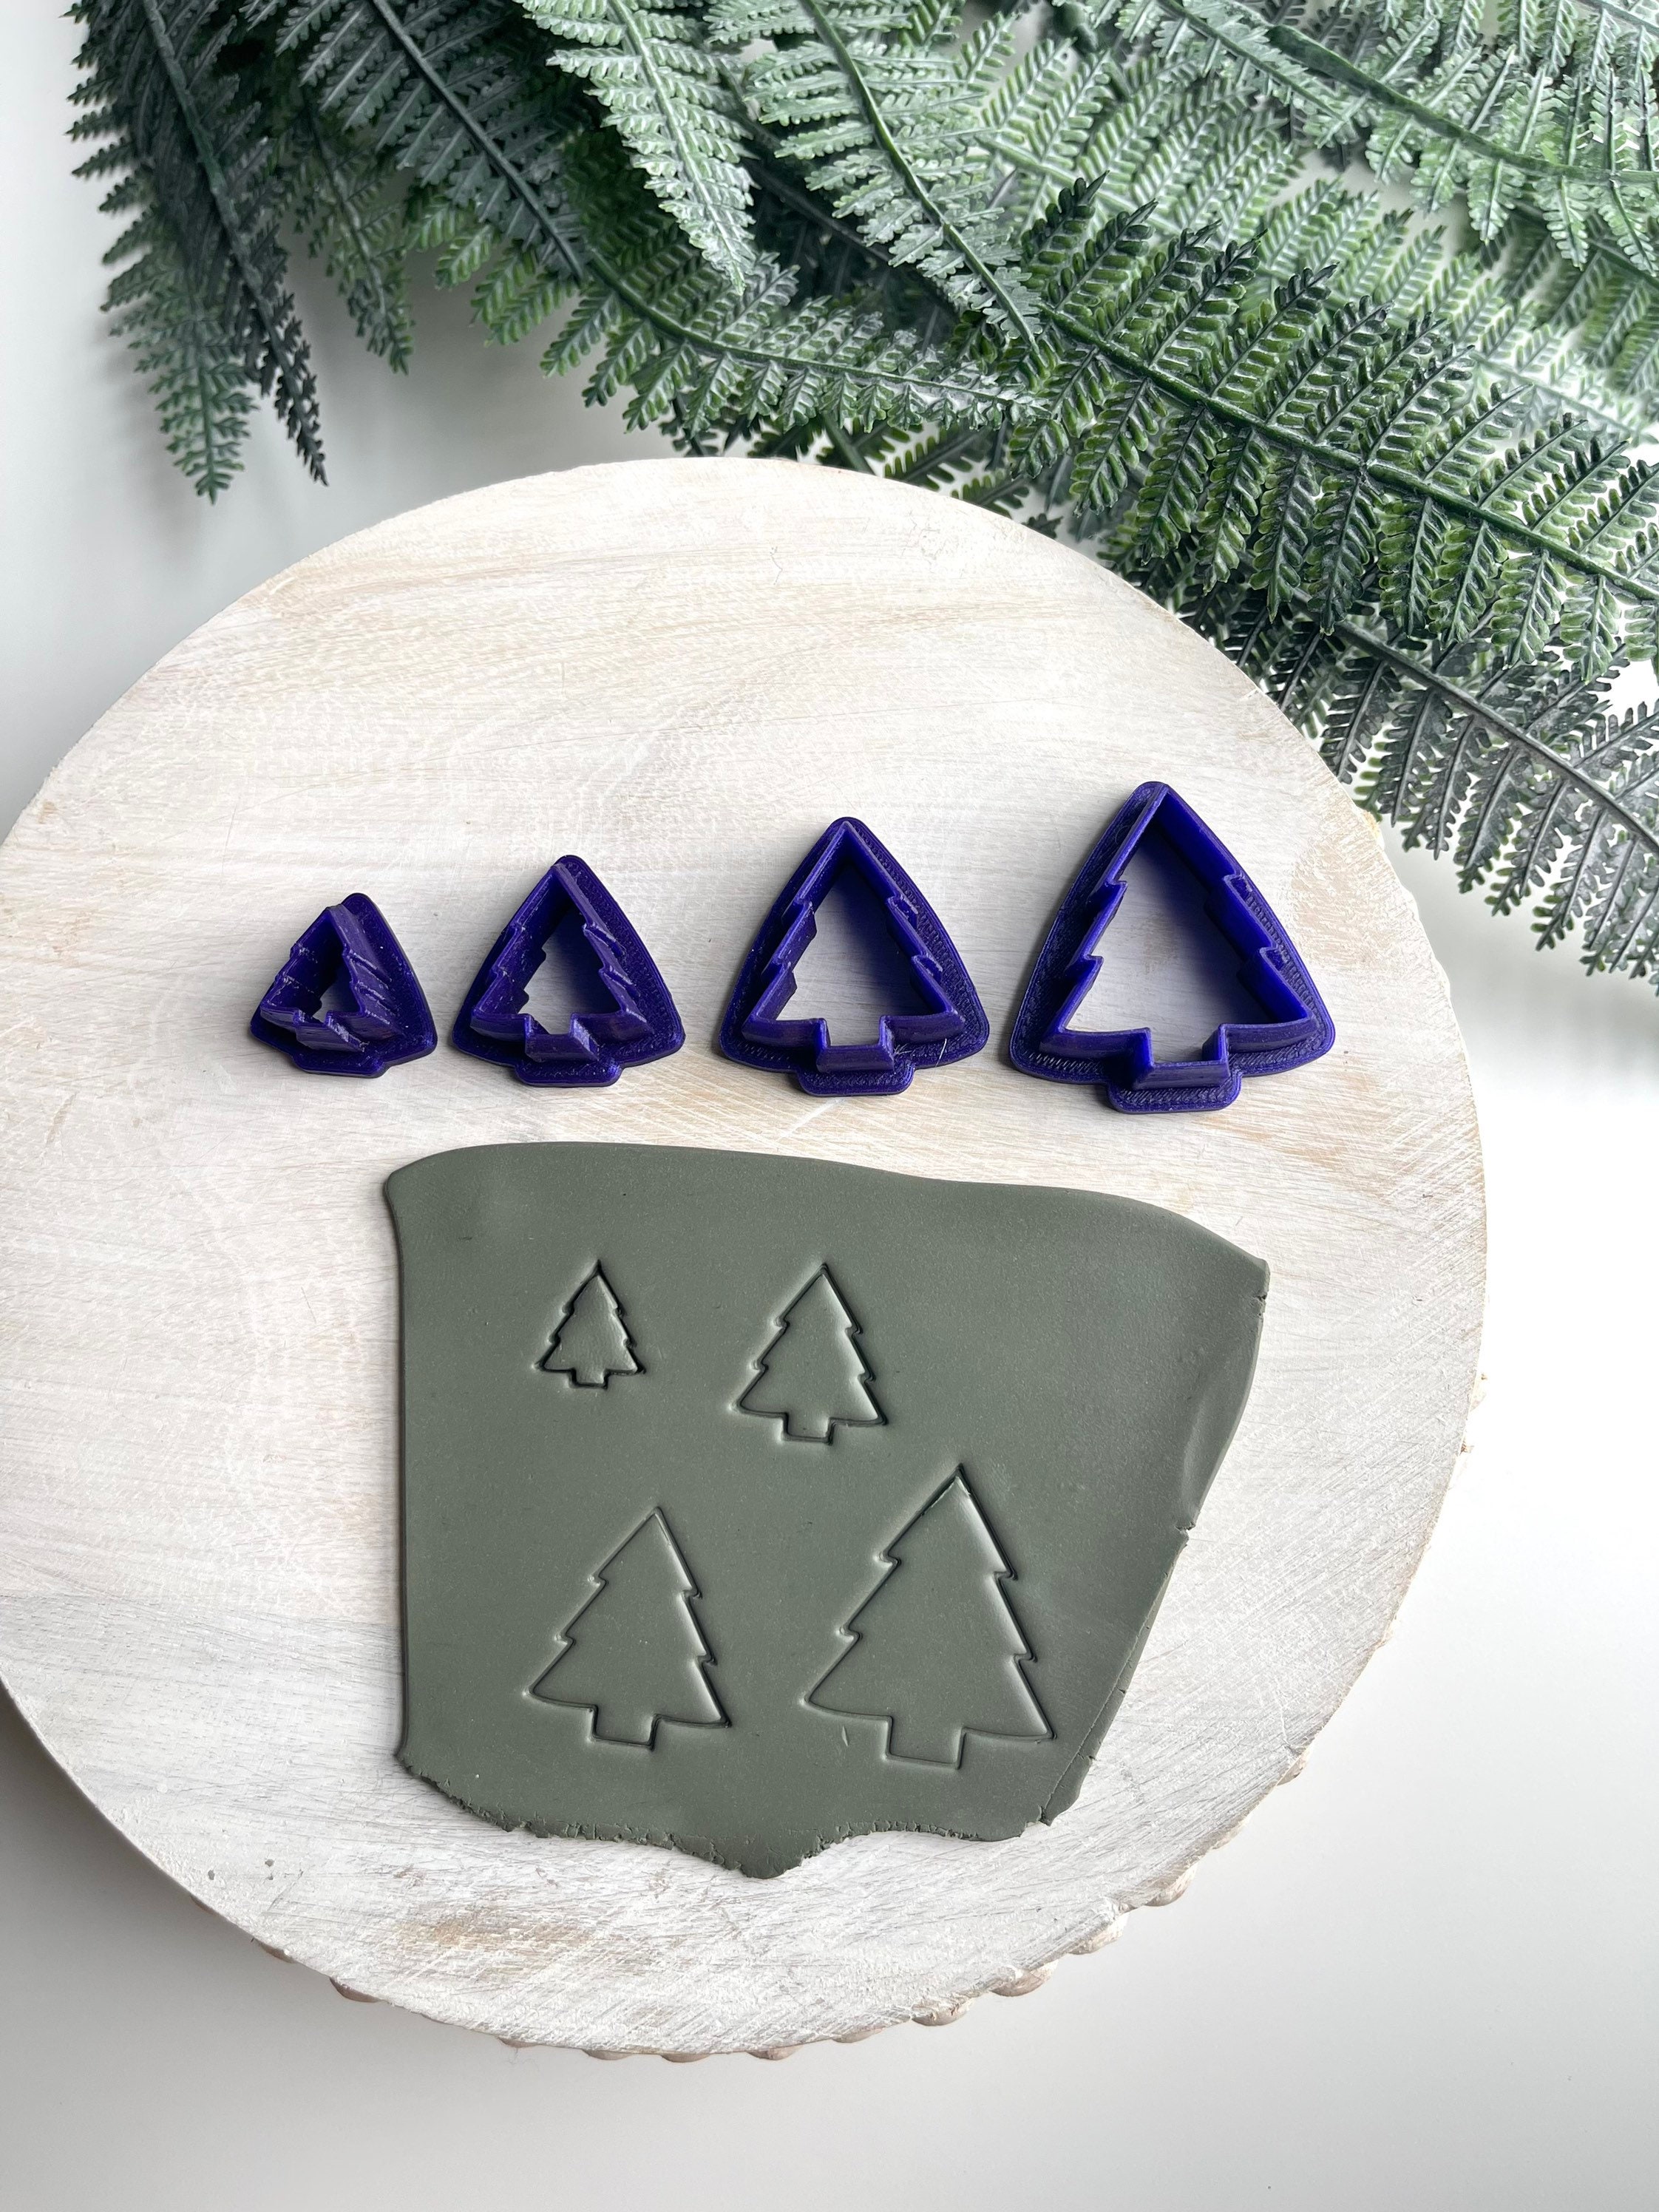  Dacmern Christmas Polymer Clay Cutters - 10 Shapes Christmas  Polymer Clay Earrings Kit for Polymer Clay Jewelry Making, Winter Holiday Clay  Earring Cutters